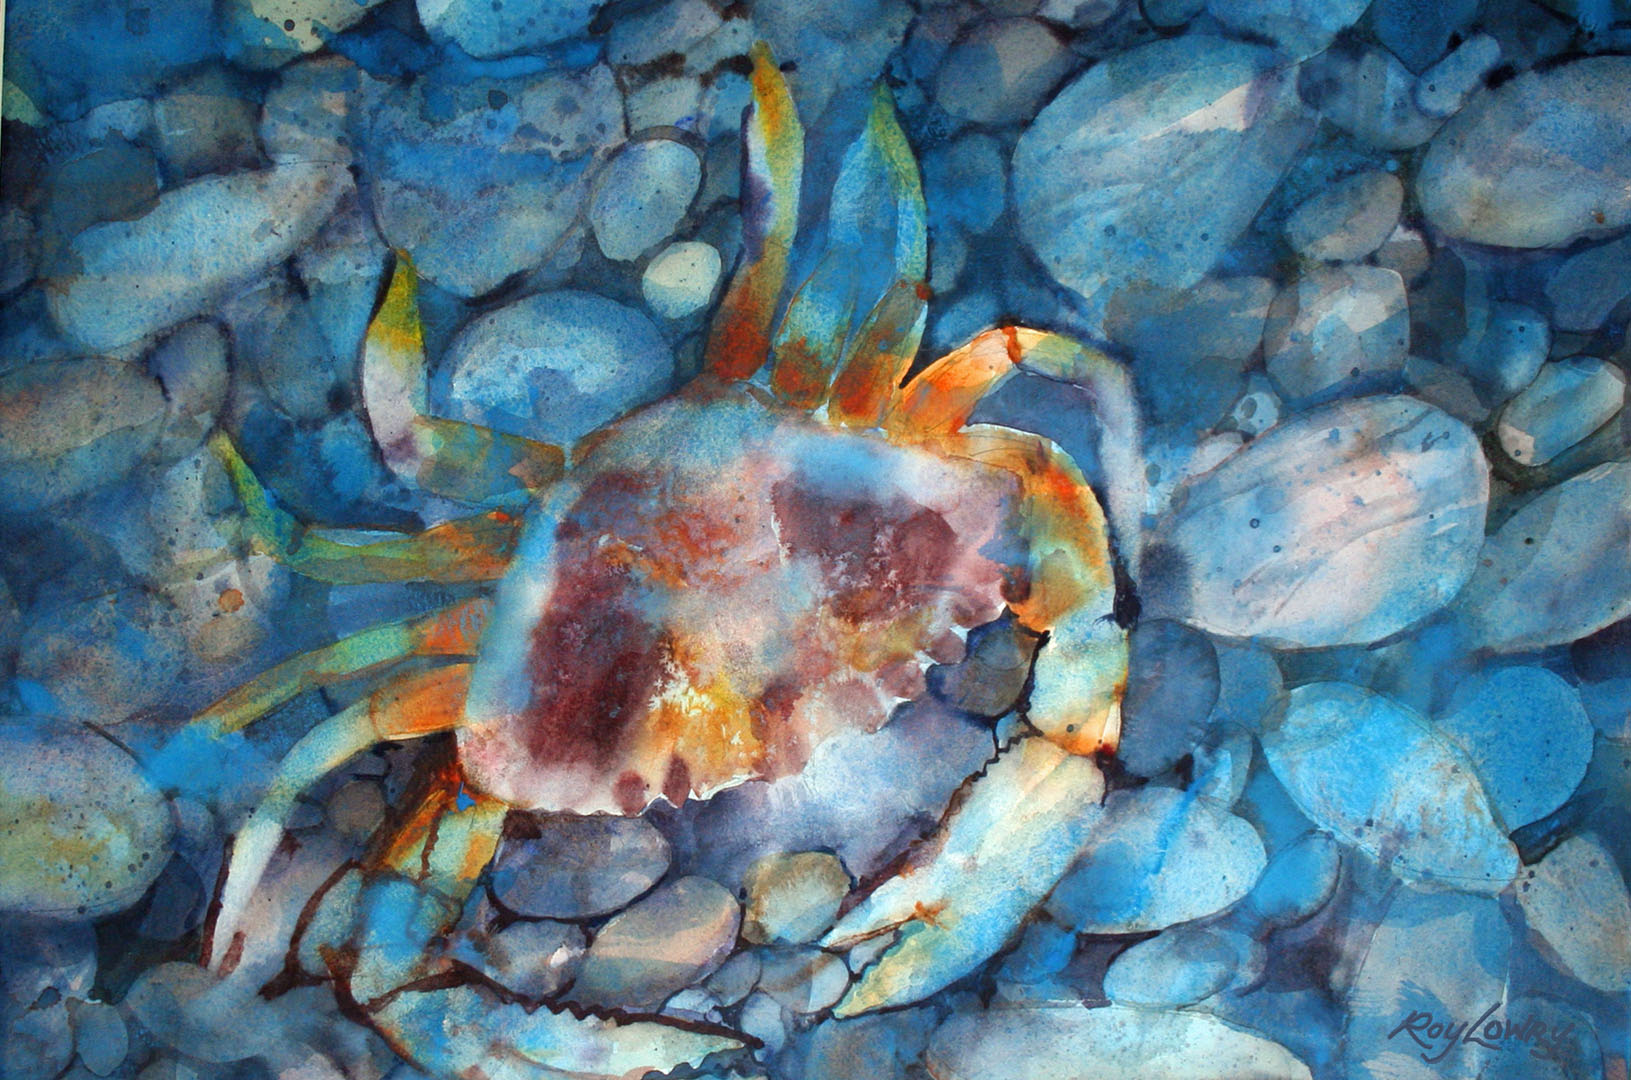 Blue Crab, Watercolor on paper, 22 x 15